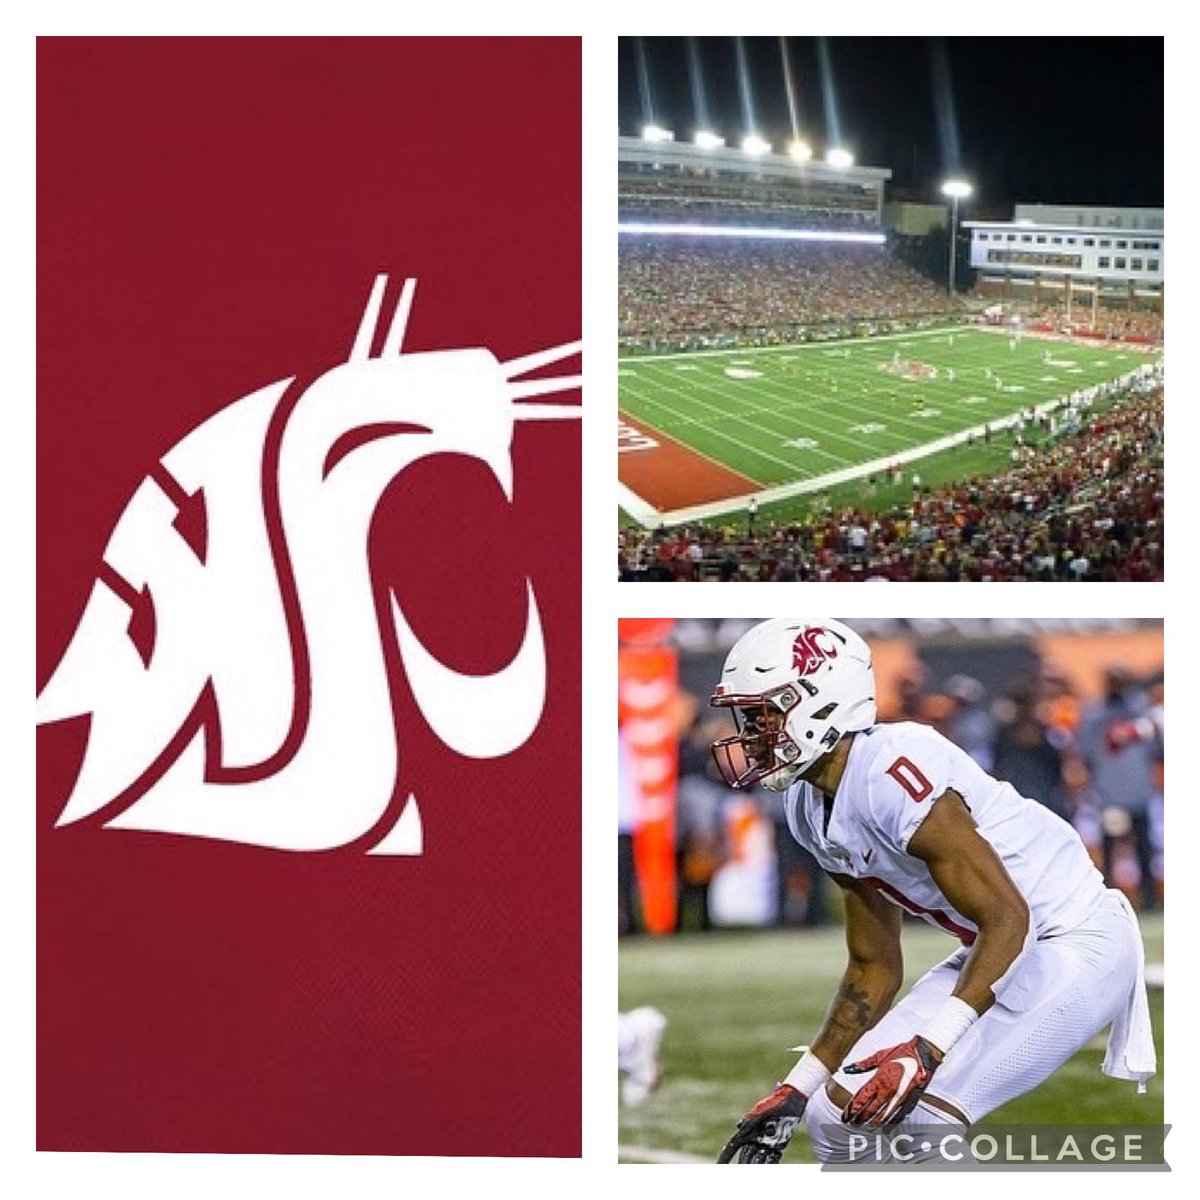 Big shout out to God ✞ Thank you 🙏🏾 @CoachB212 and @CoachMalone18 for offering me a scholarship at Washington State University. #GoCougs🐾 #SonWon @CoachPatu @Son1OneWon @DBSelect13 @SPD_performance @BrandonHuffman @GregBiggins @NEE_FEE_ZEE @Go_CCSFootball